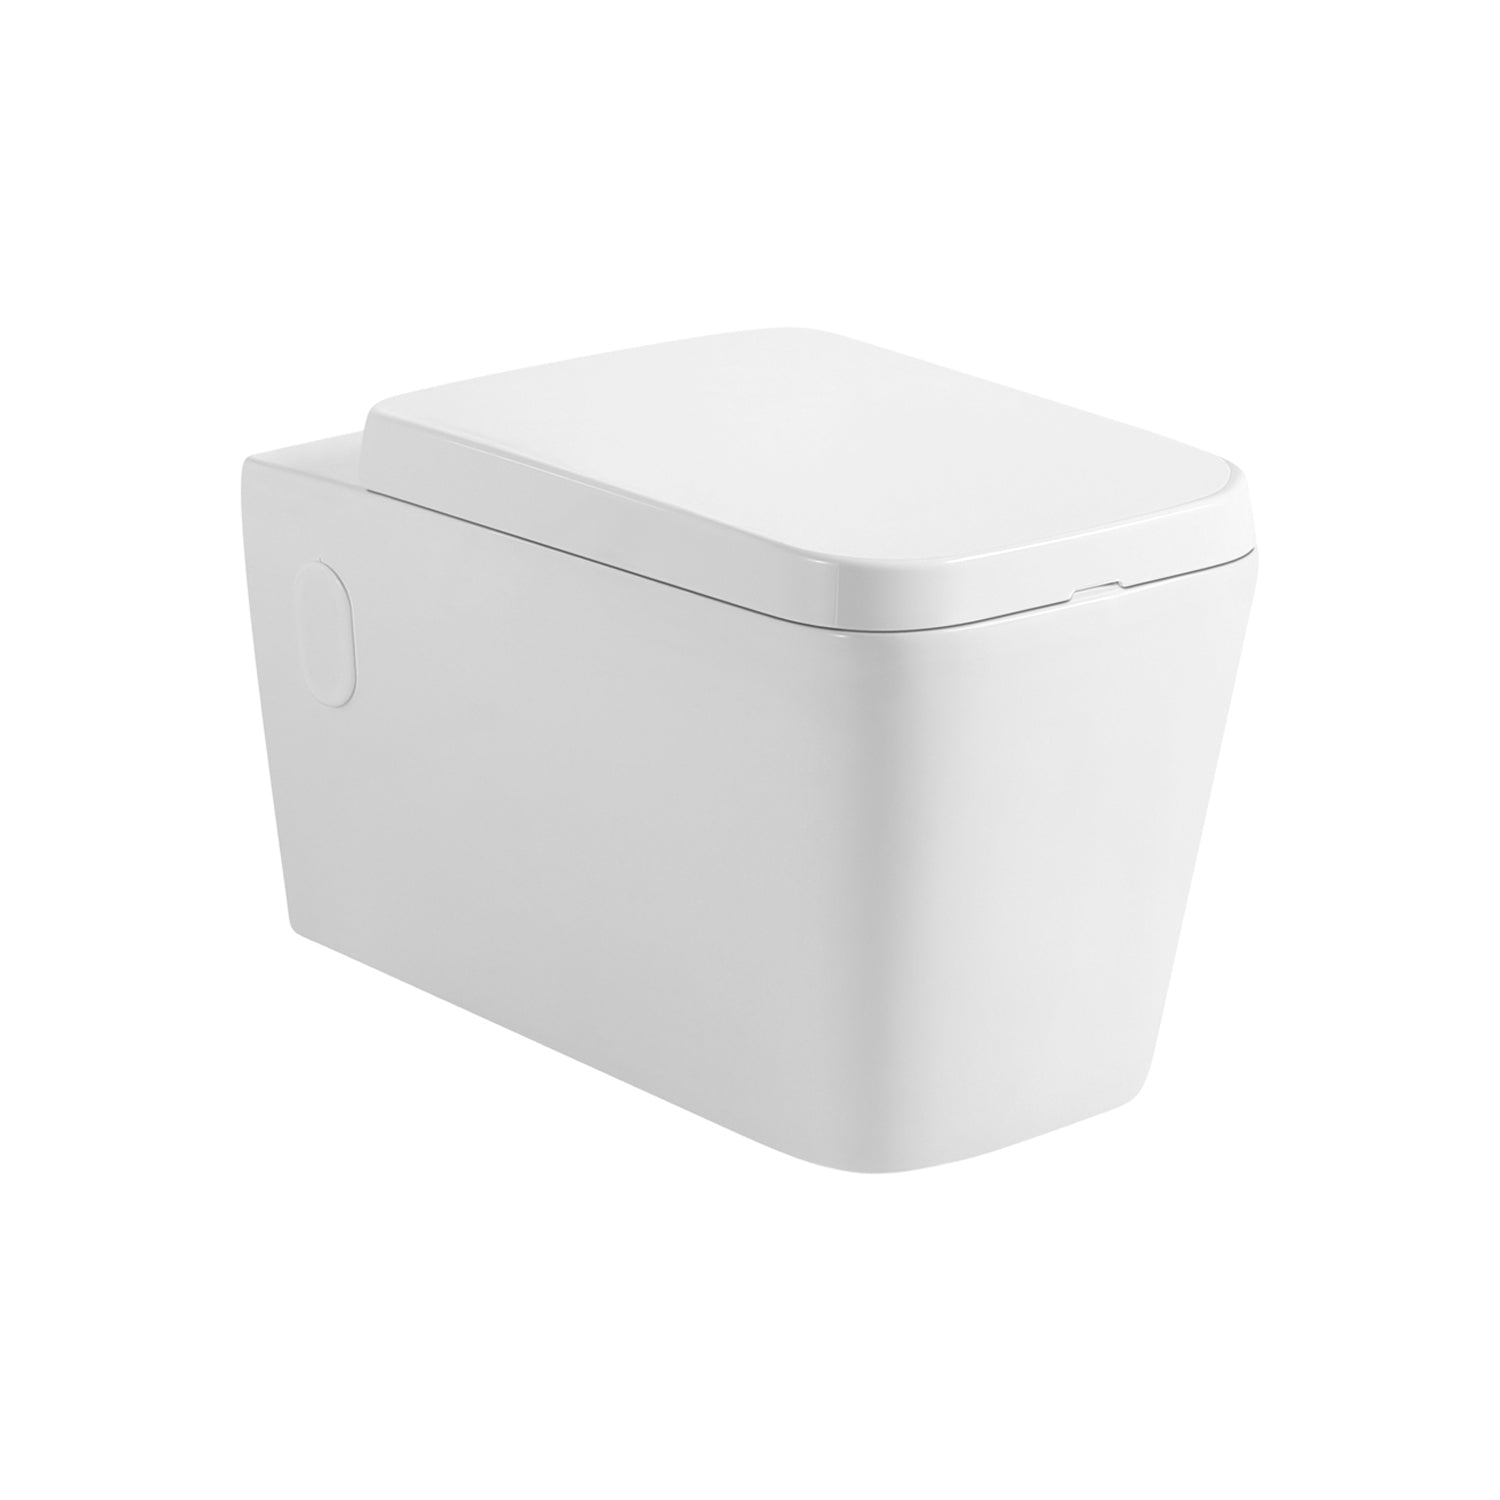 DAX One Piece Modern Square Toilet, Wall Mount with Soft Closing Seat and Dual Flush High-Efficiency, Ceramic, White Finish, Height 13 Inches (BSN-CL11002A-17)